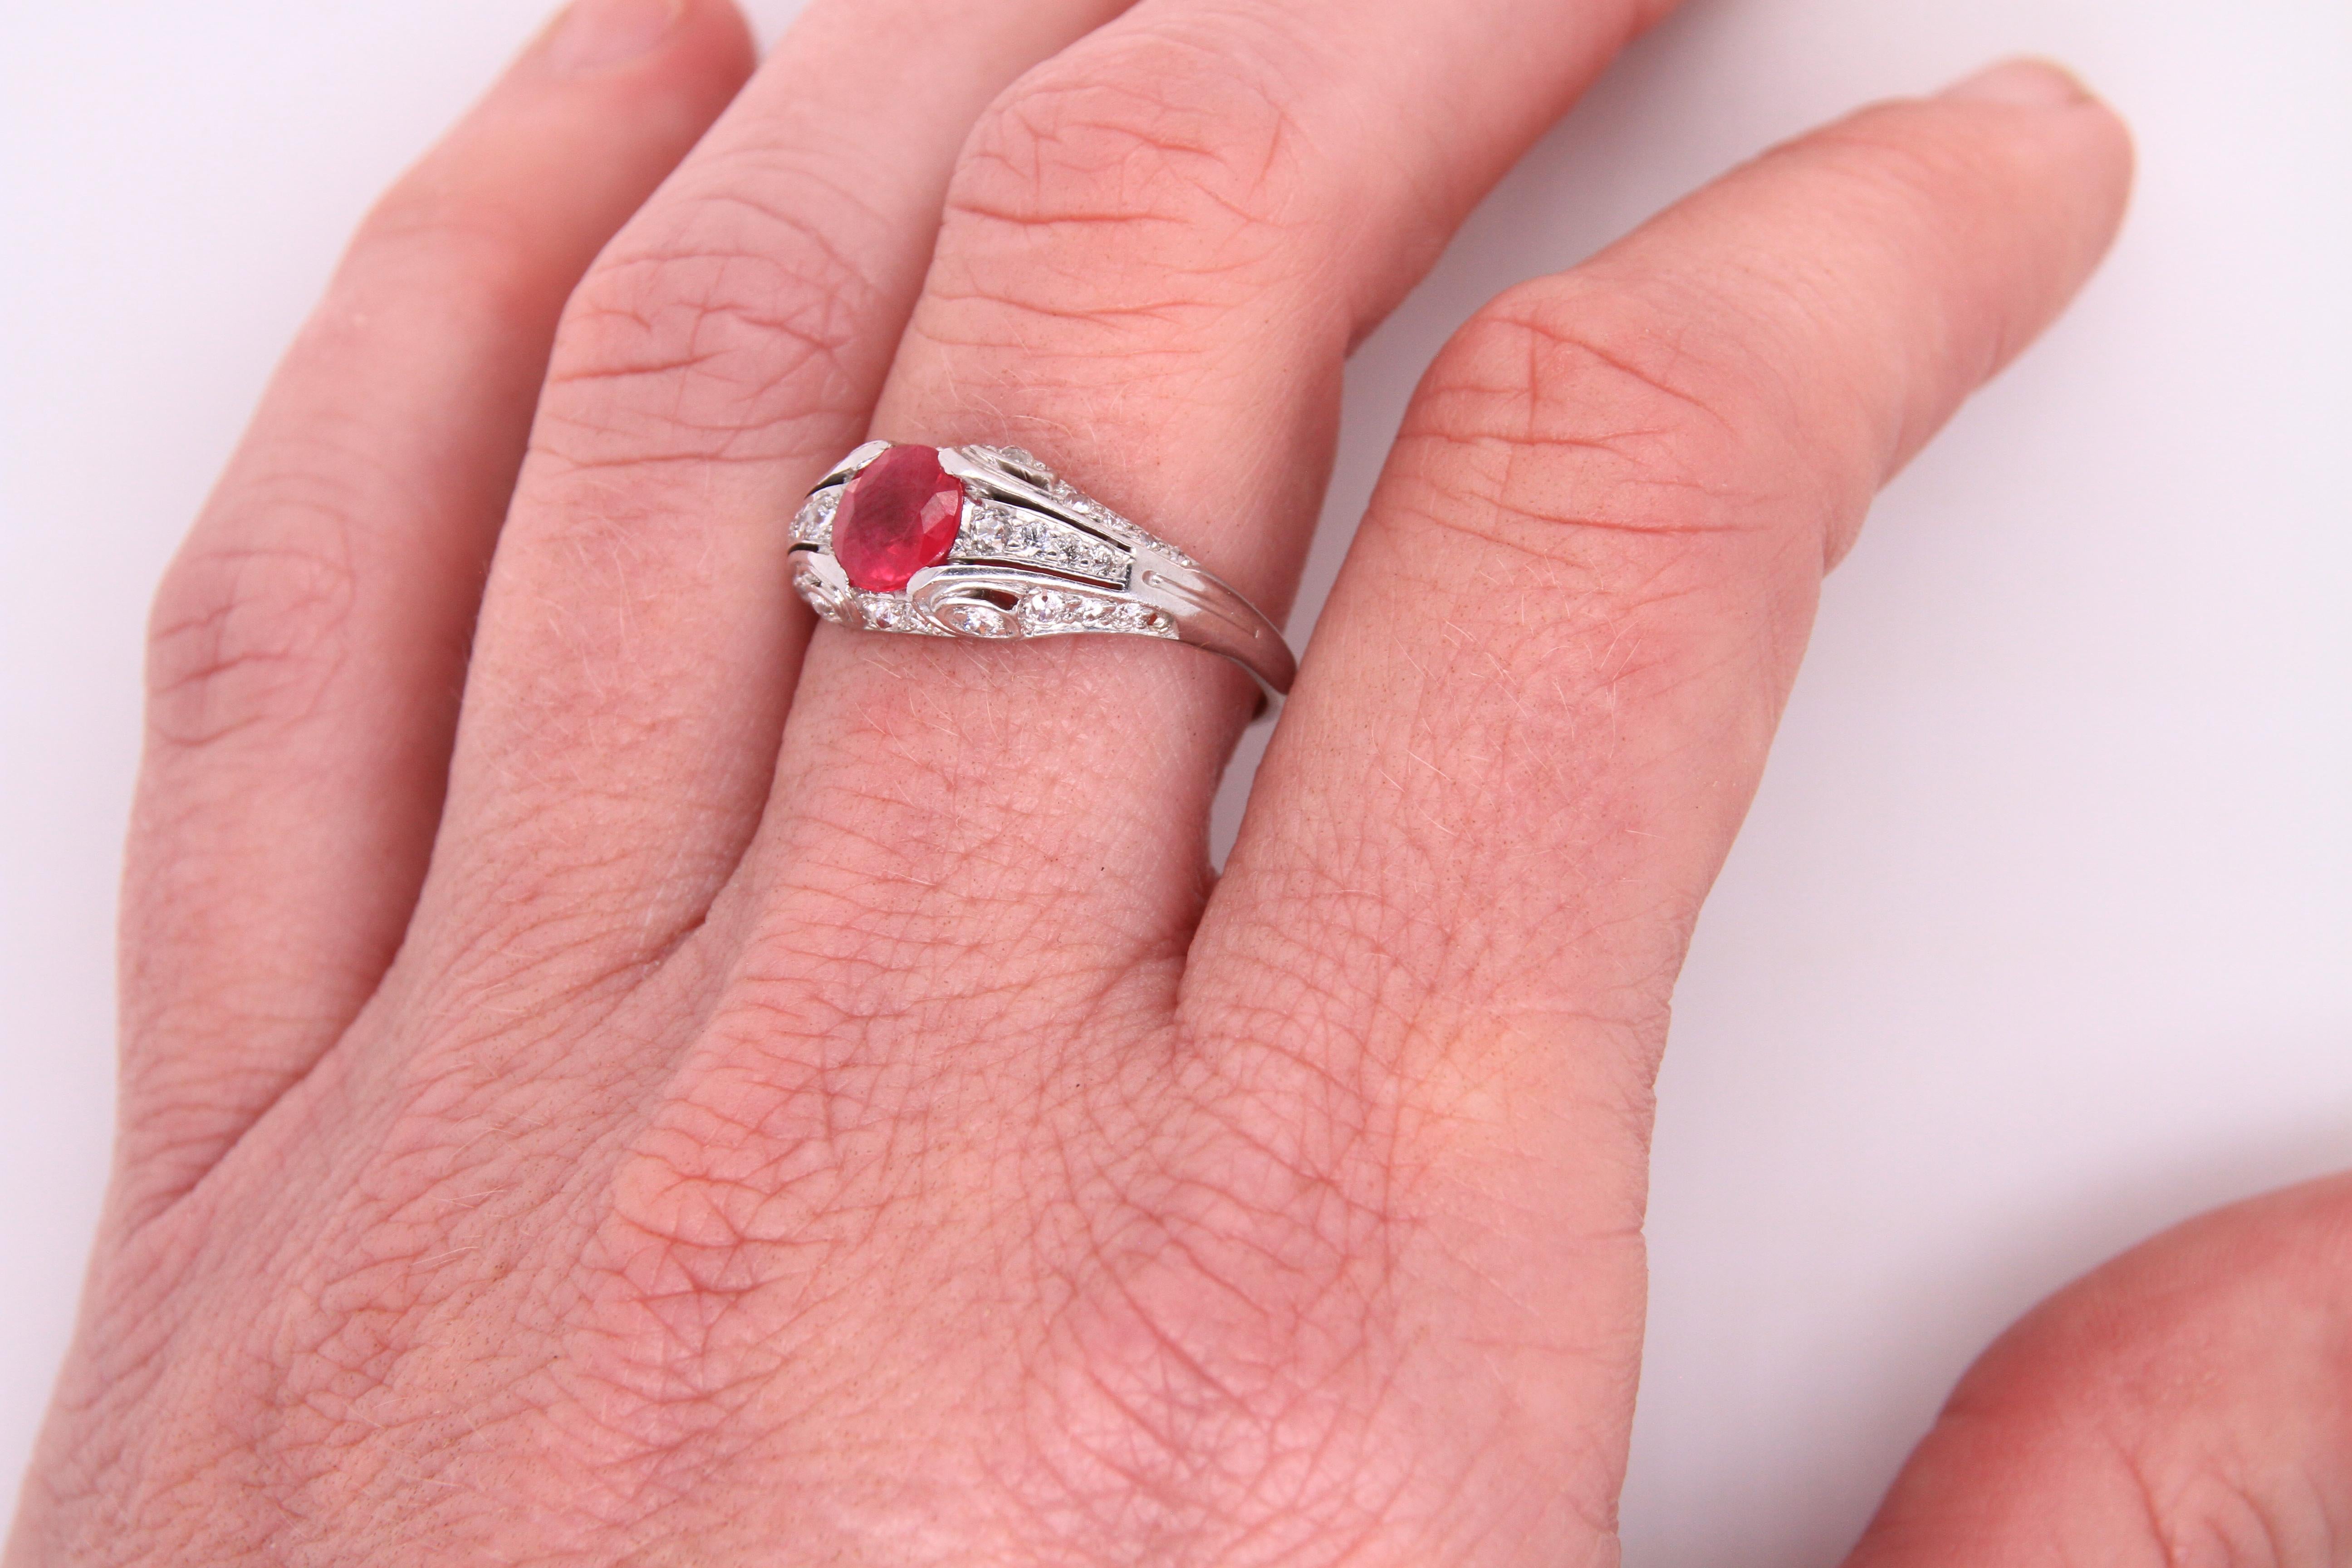 Oval Burmese Ruby and Diamond White Gold Bridal Engagement Ring, 14k white gold. 1 carat ruby with diamonds.
Weight: 4.7 grams
Size 8
Beautiful and delicate ruby and diamond ring, sure to be a stunner anywhere.